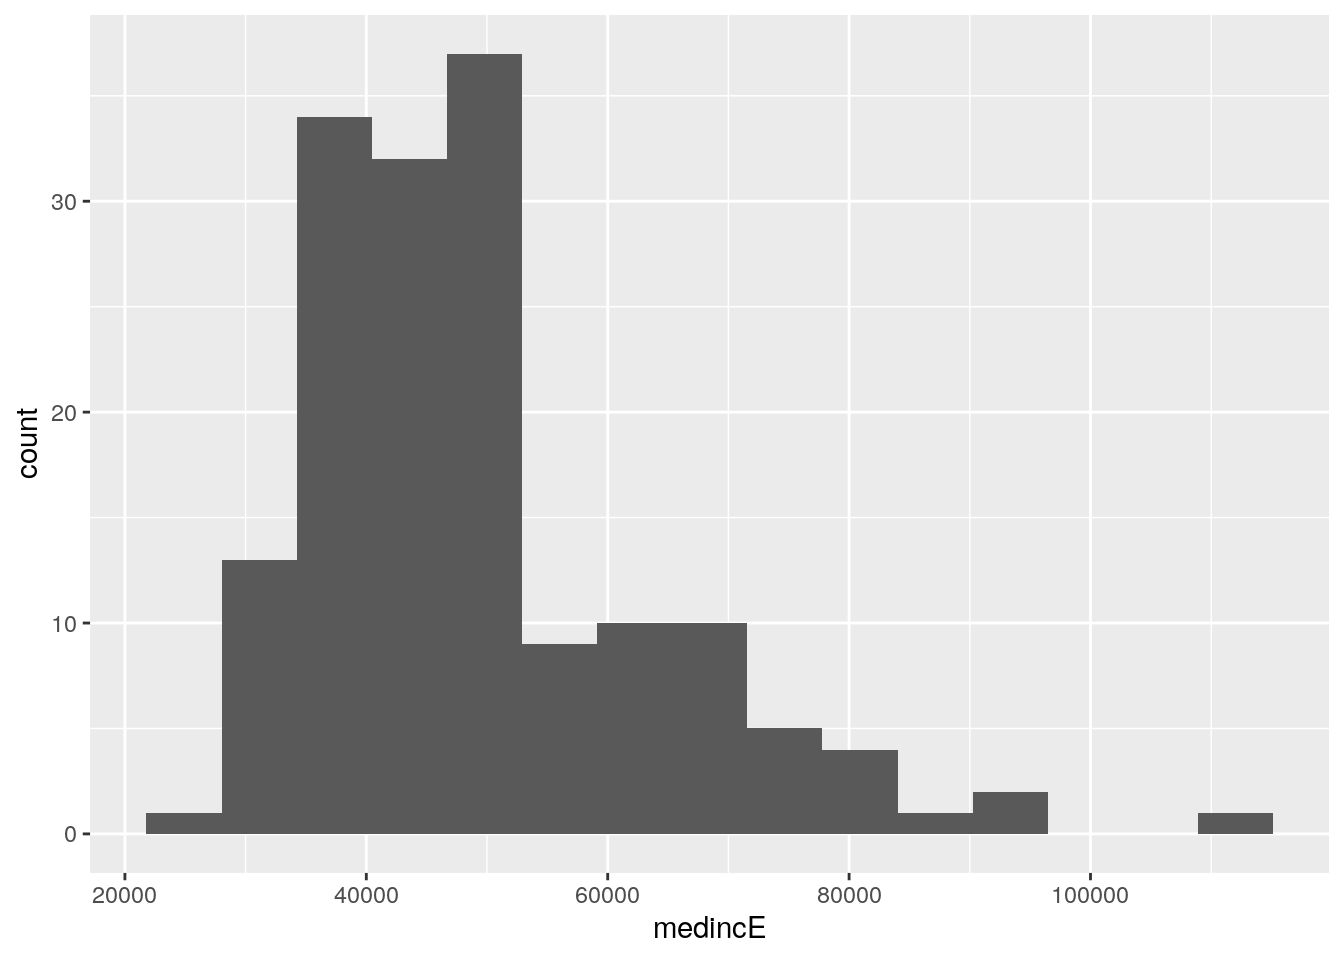 Histogram with the number of bins reduced to 15